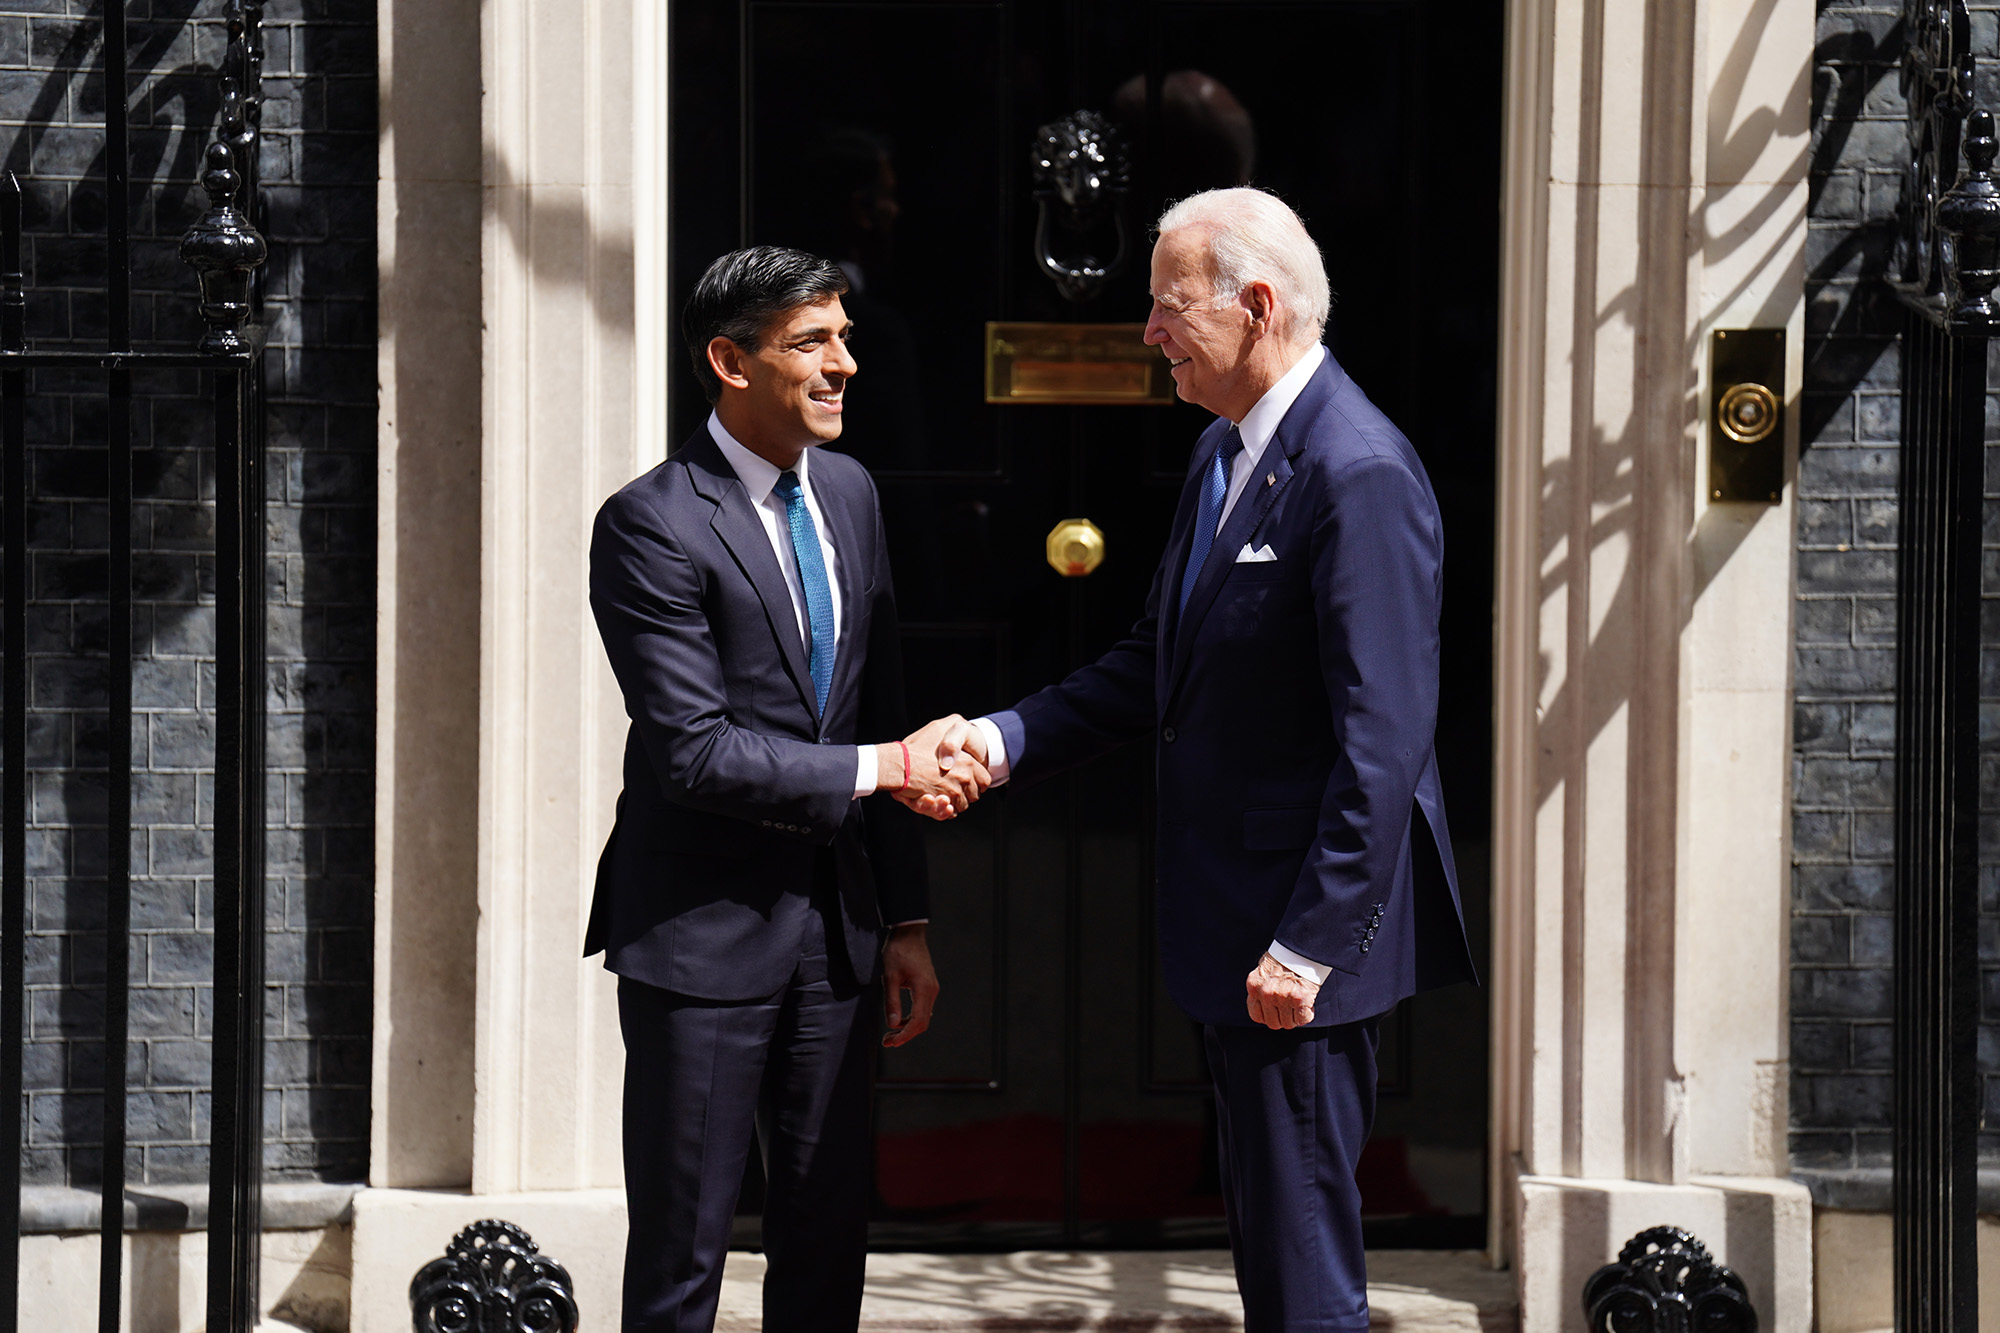 Prime Minister Rishi Sunak, left, greets US President Joe Biden outside 10 Downing Street, London, ahead of a meeting during his visit to the UK on July 10.